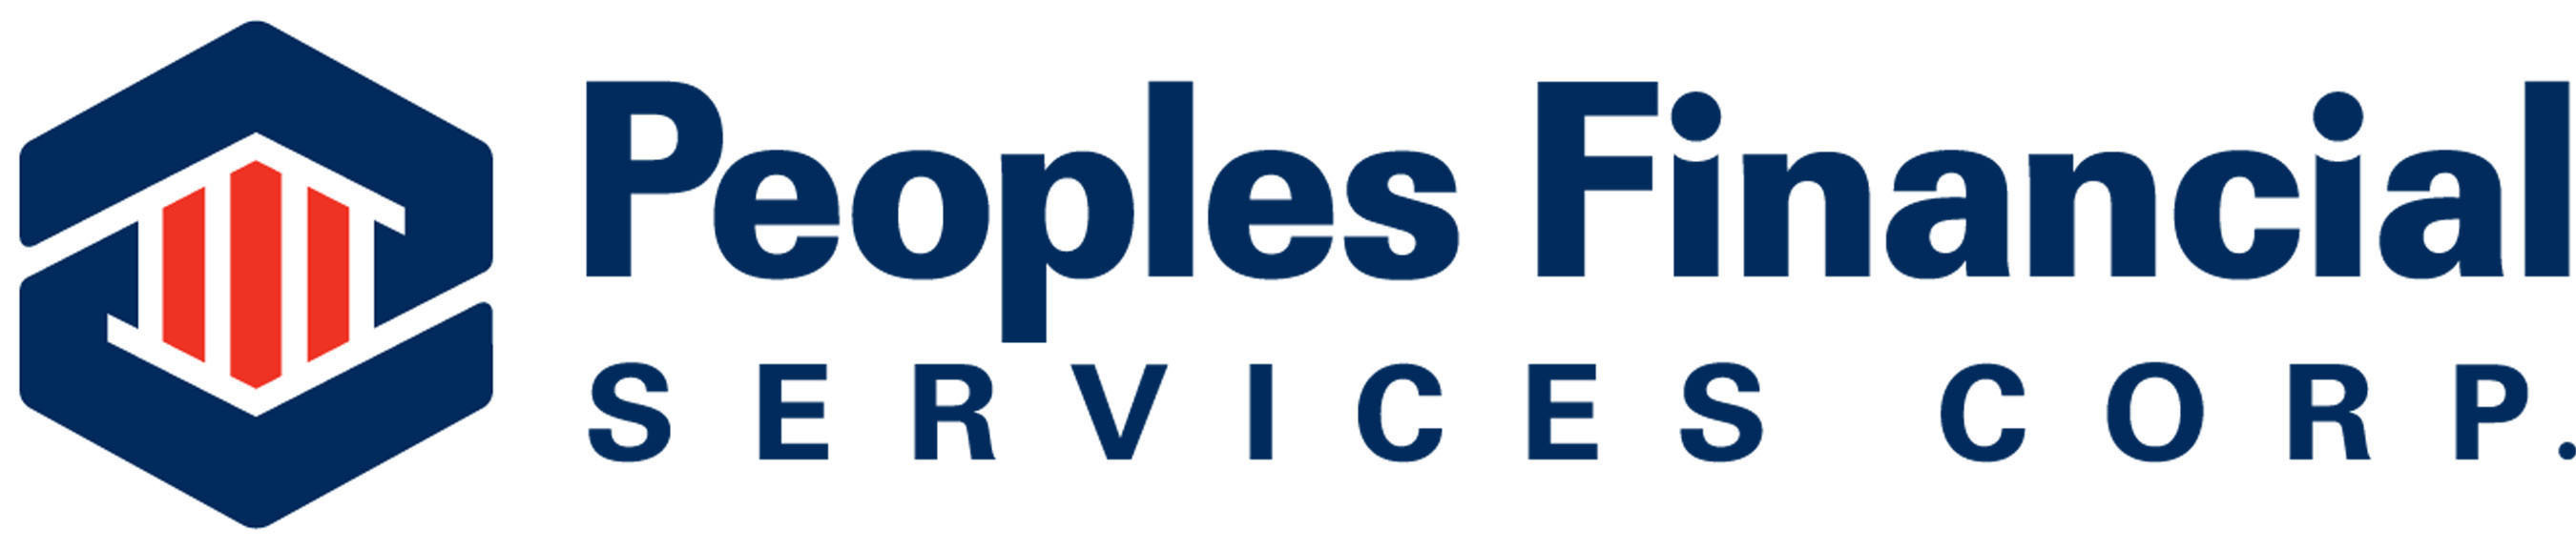 PEOPLES FINANCIAL SERVICES CORP. Declares Fourth Quarter 2019 Dividend